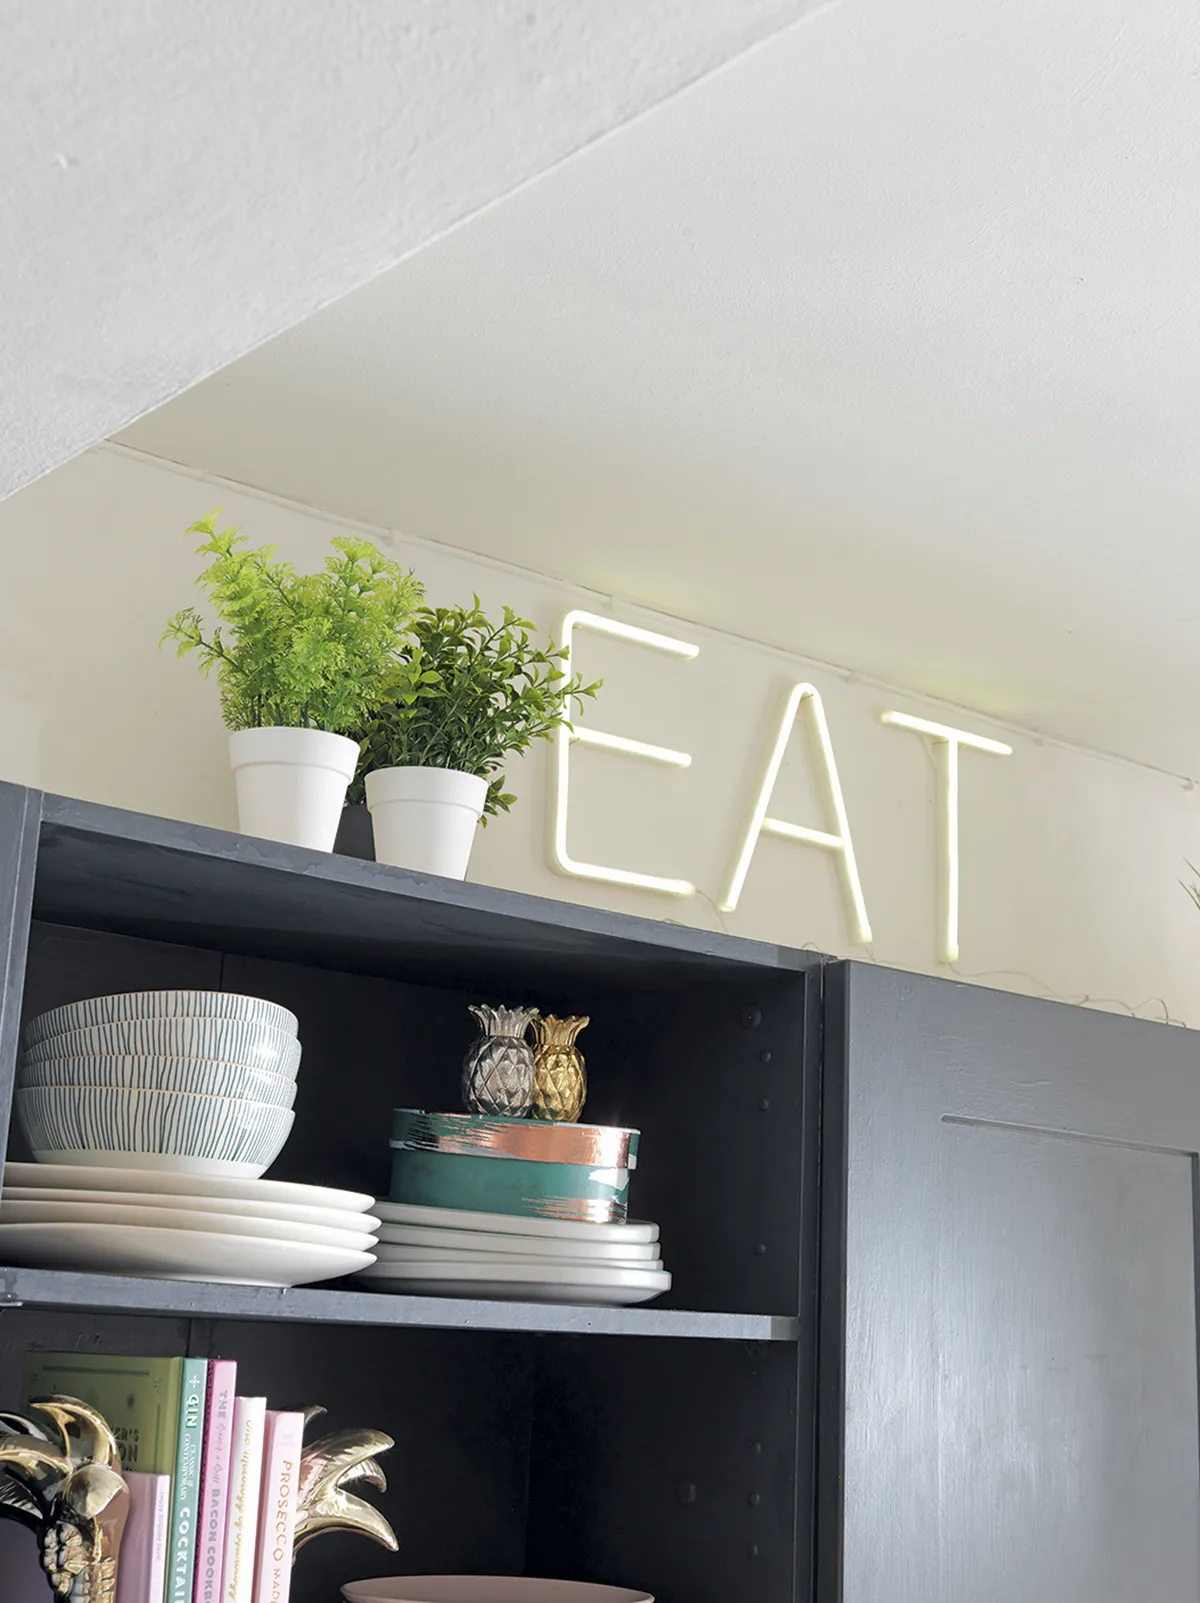 ‘The LED ‘EAT’ sign is from Home Bargains. We bought the letters individually, so you can spell out any word. They add a bit of fun to the kitchen’